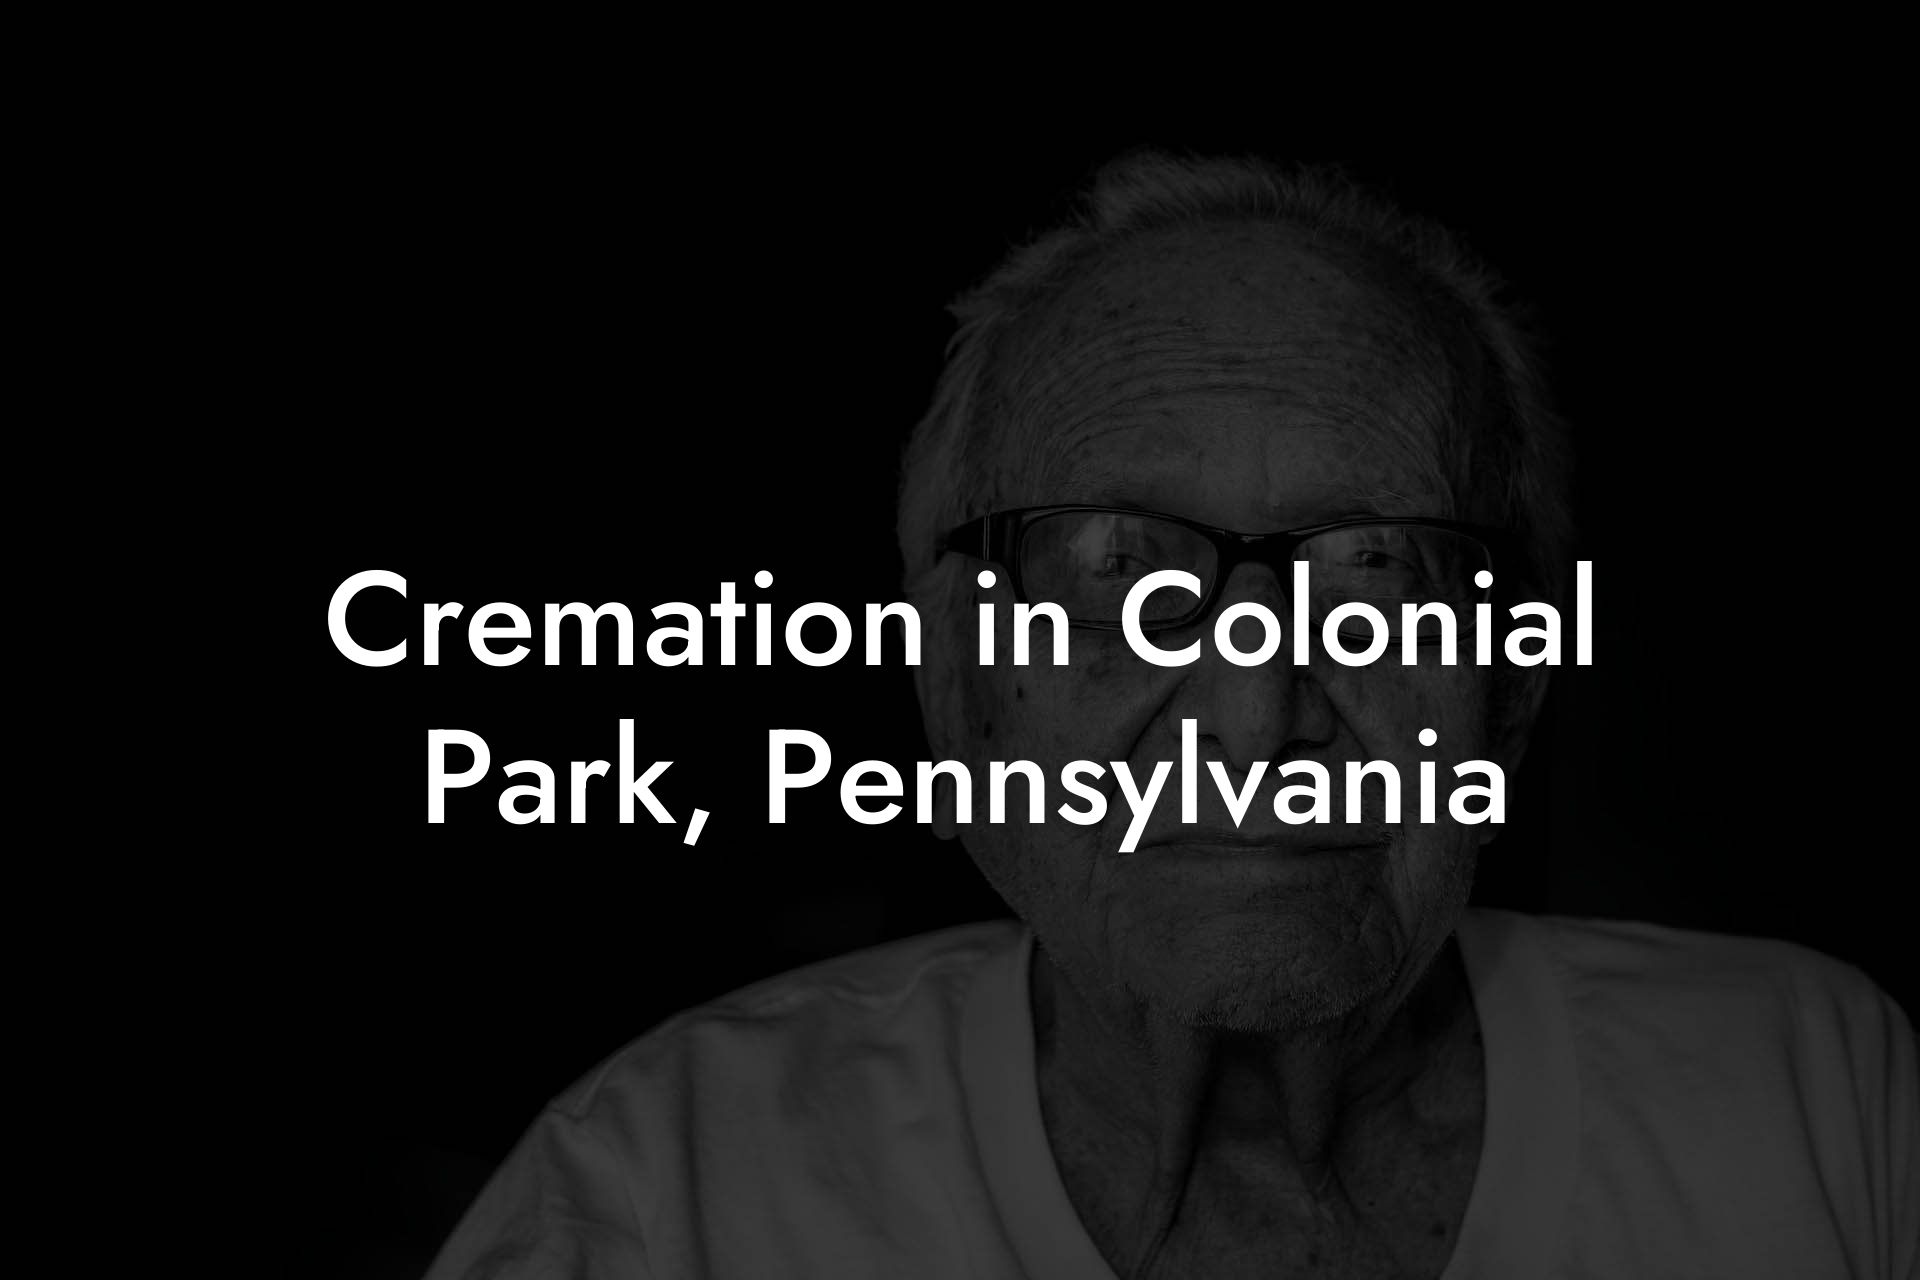 Cremation in Colonial Park, Pennsylvania